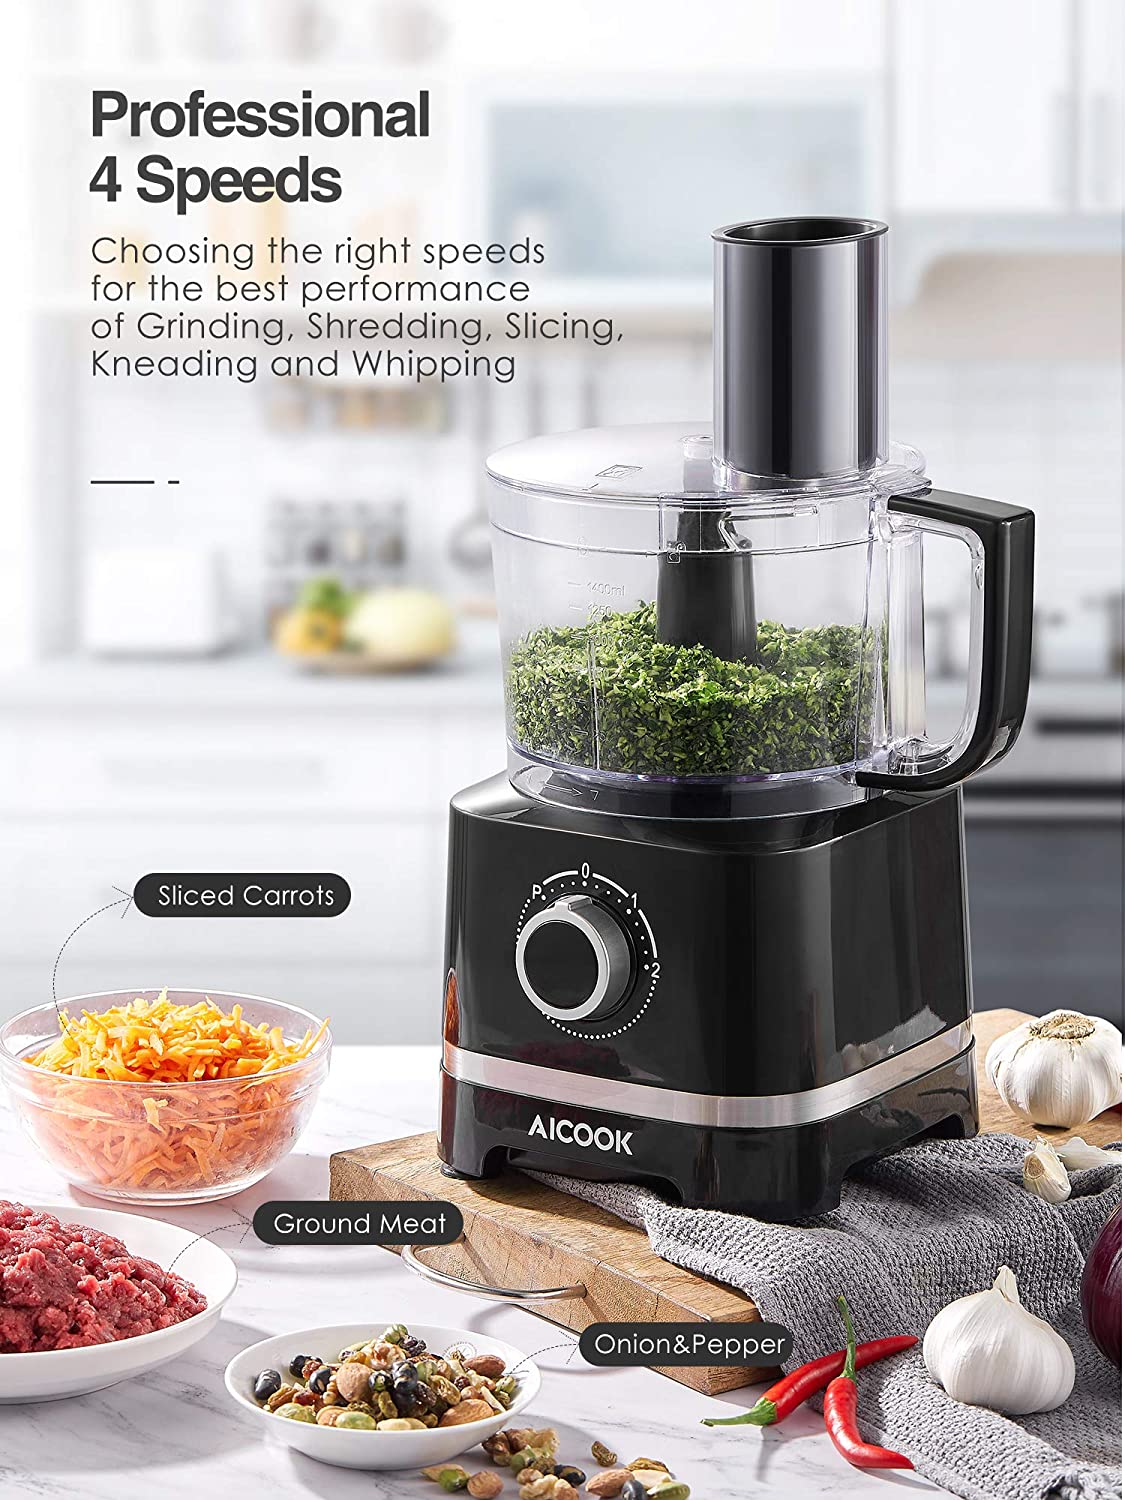 AICOOK 16 Functions Food Processor, 700W, 12-Cup Food Chopper with 4 Speeds for Chopping, Pureeing, Mixing, Shredding, MODEL: FP202SA